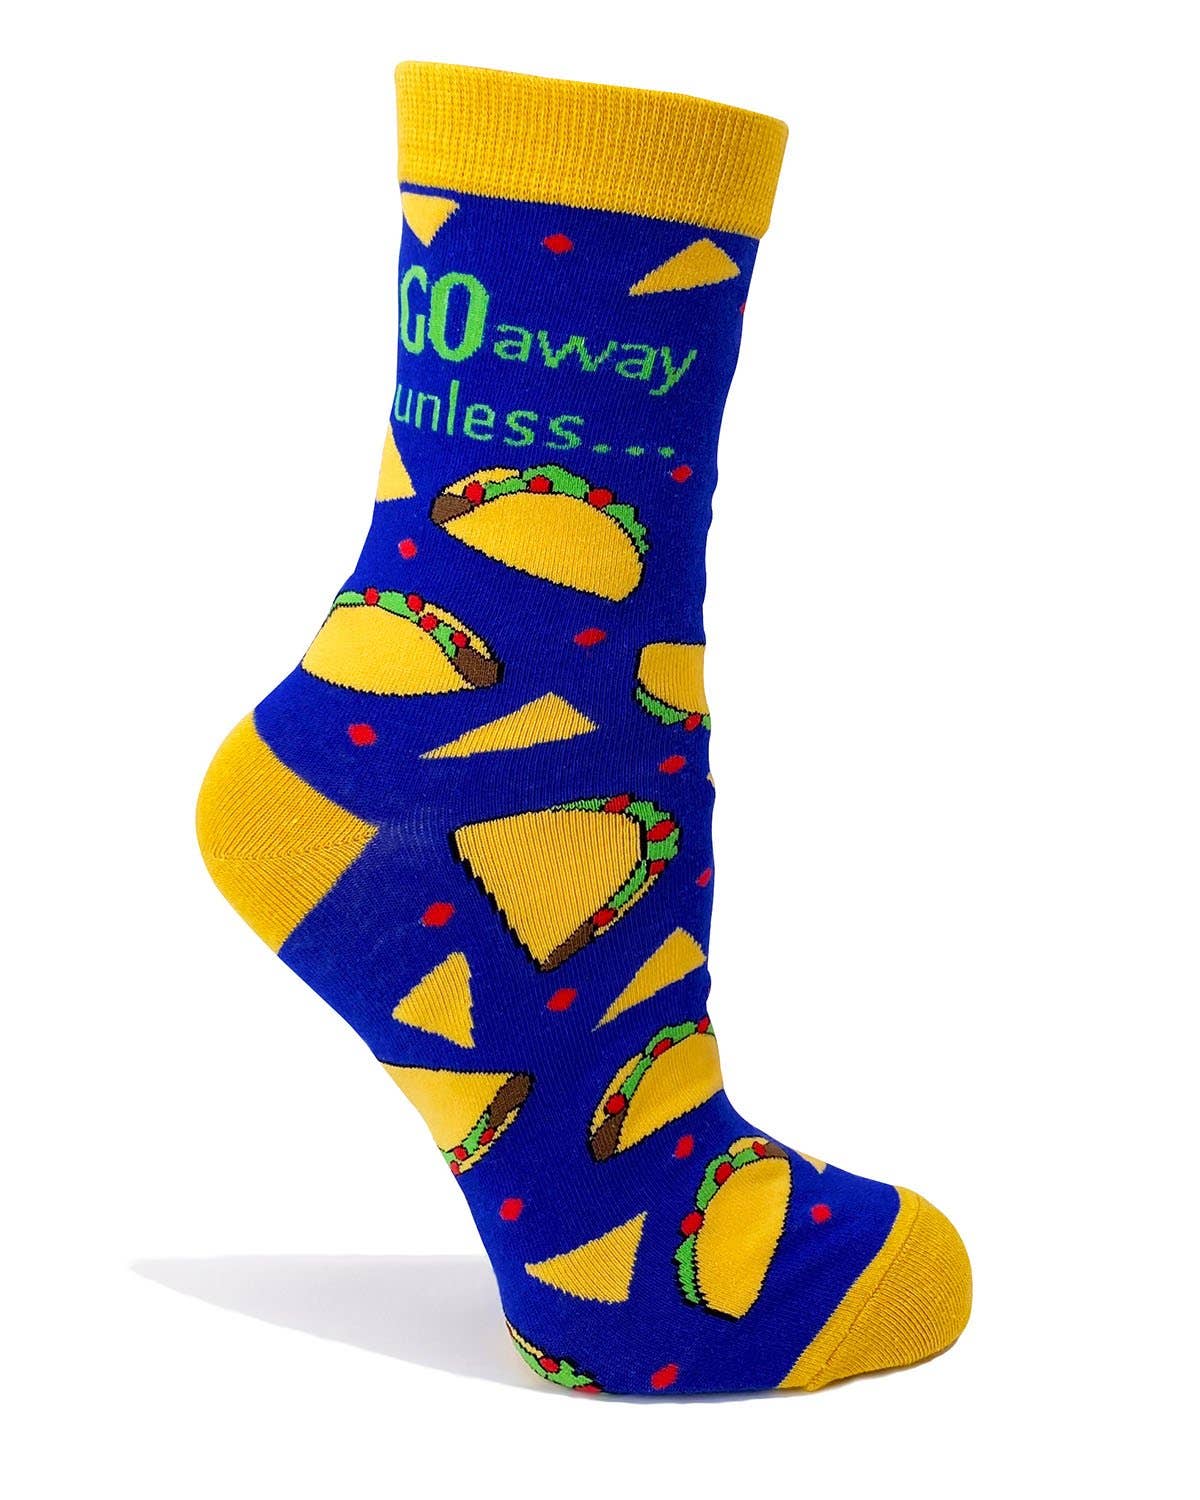 Go Away Unless You Have Tacos Women's Novelty Crew Socks